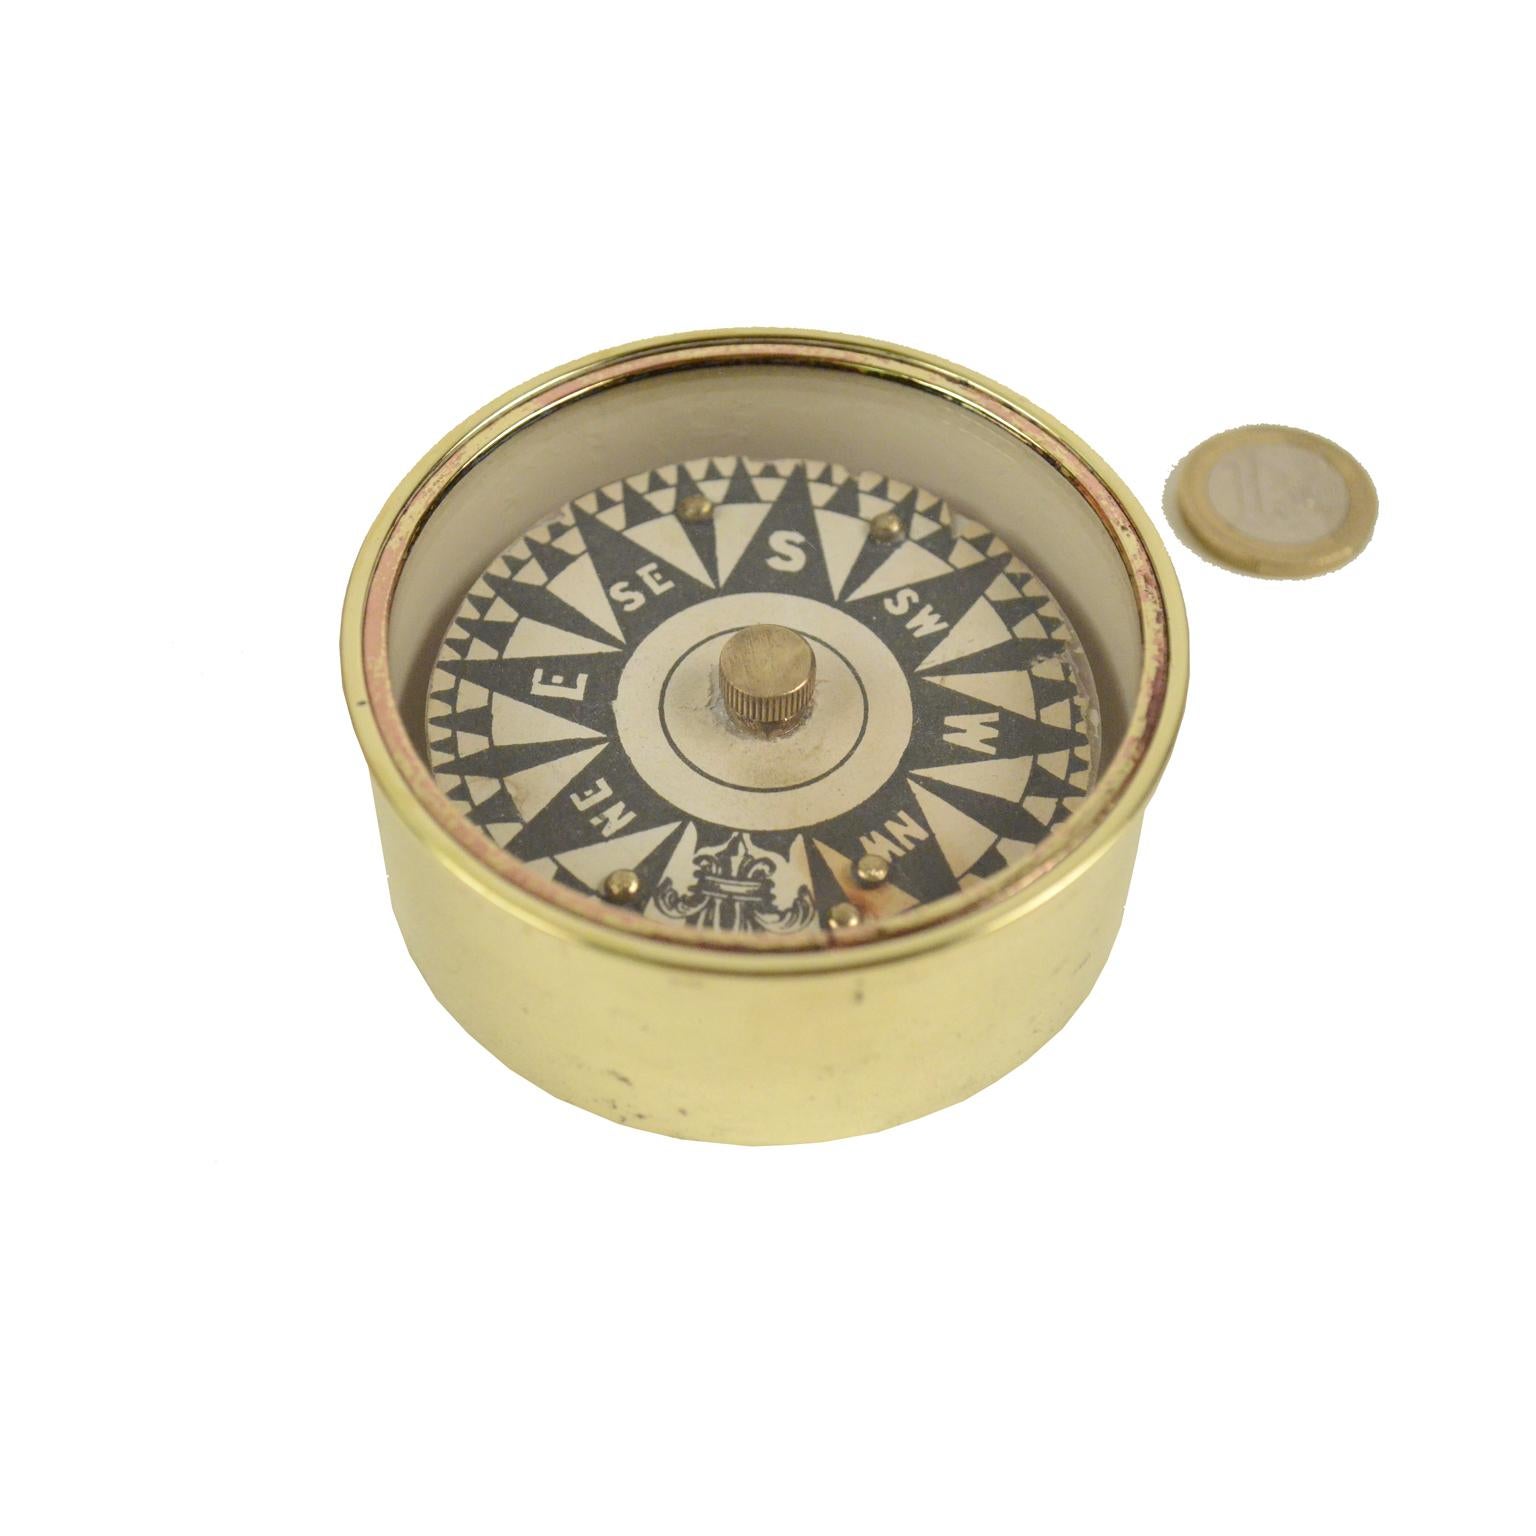 Dry compass placed in its original turned brass box with a protection glass. English manufacture of the mid-19th century. Compass card printed by engraving on copper plate. Very good condition and fully functional. Measures: Diameter 8 cm, height cm